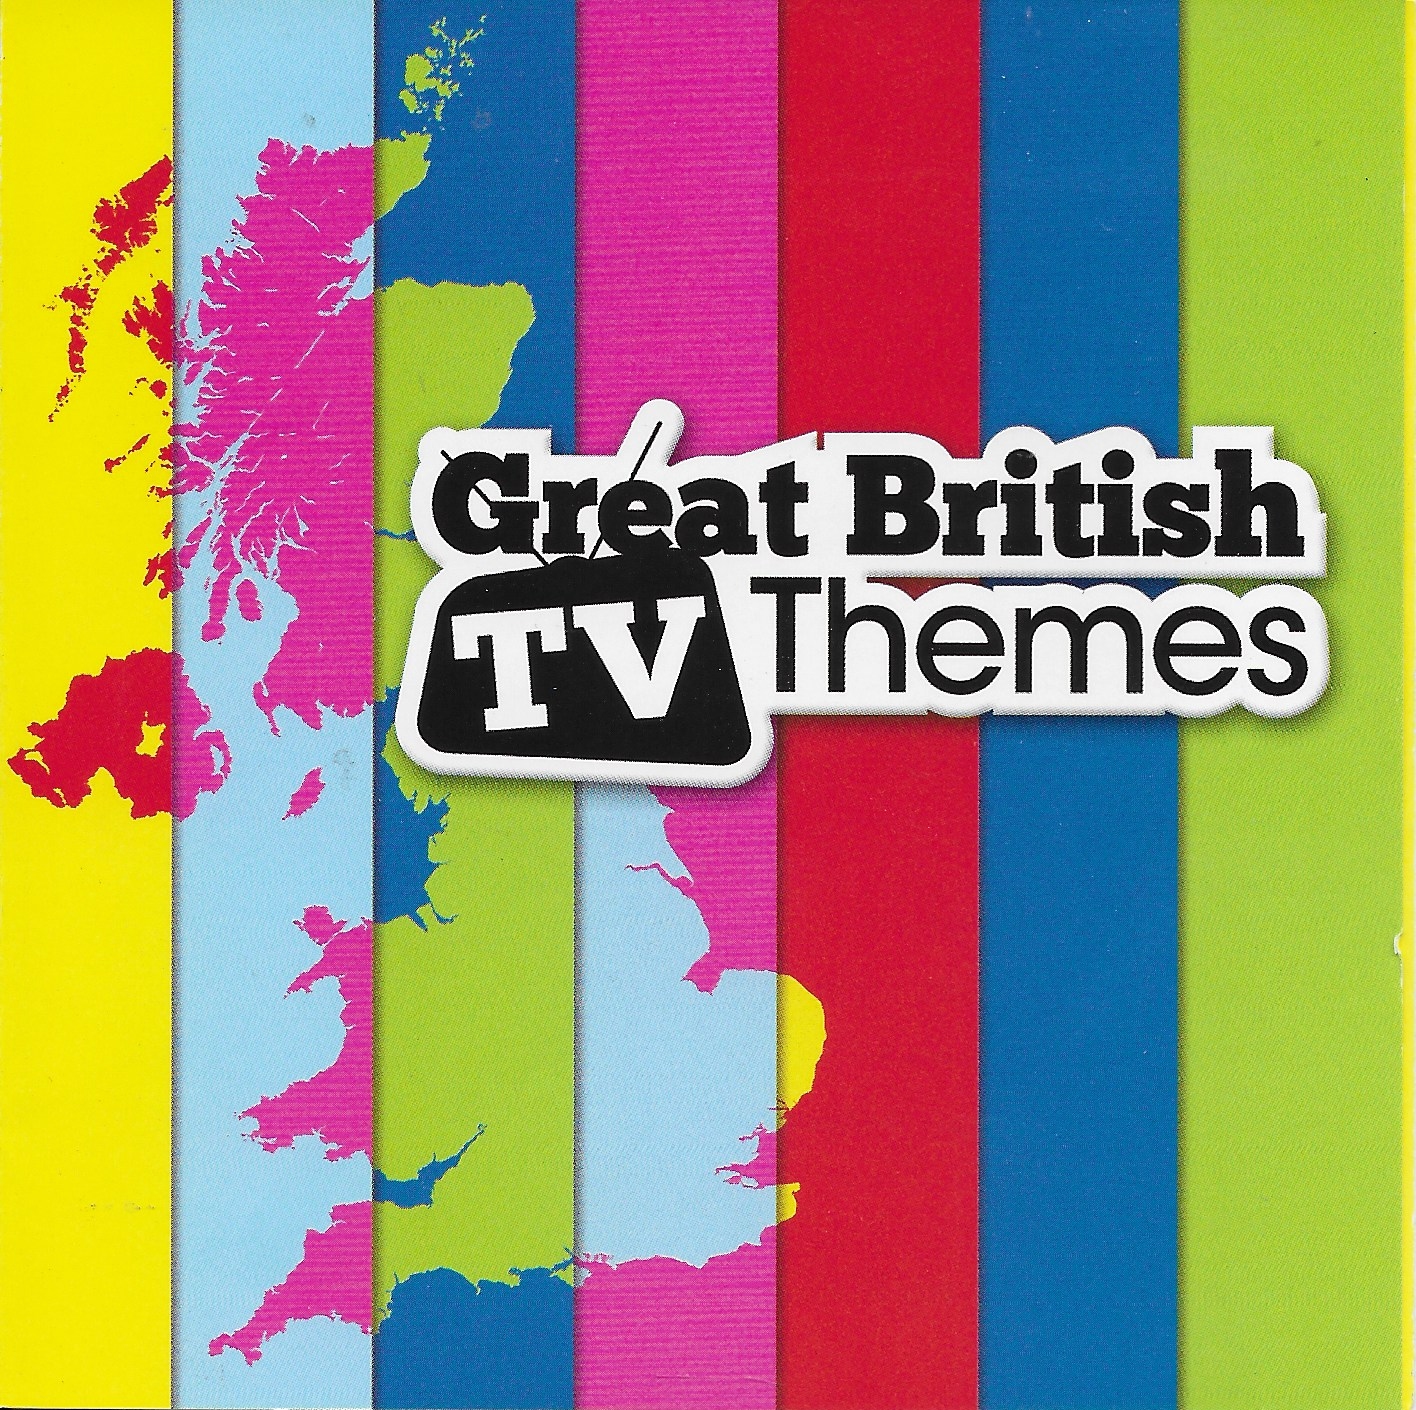 Picture of Great British TV themes by artist Various from ITV, Channel 4 and Channel 5 cds library